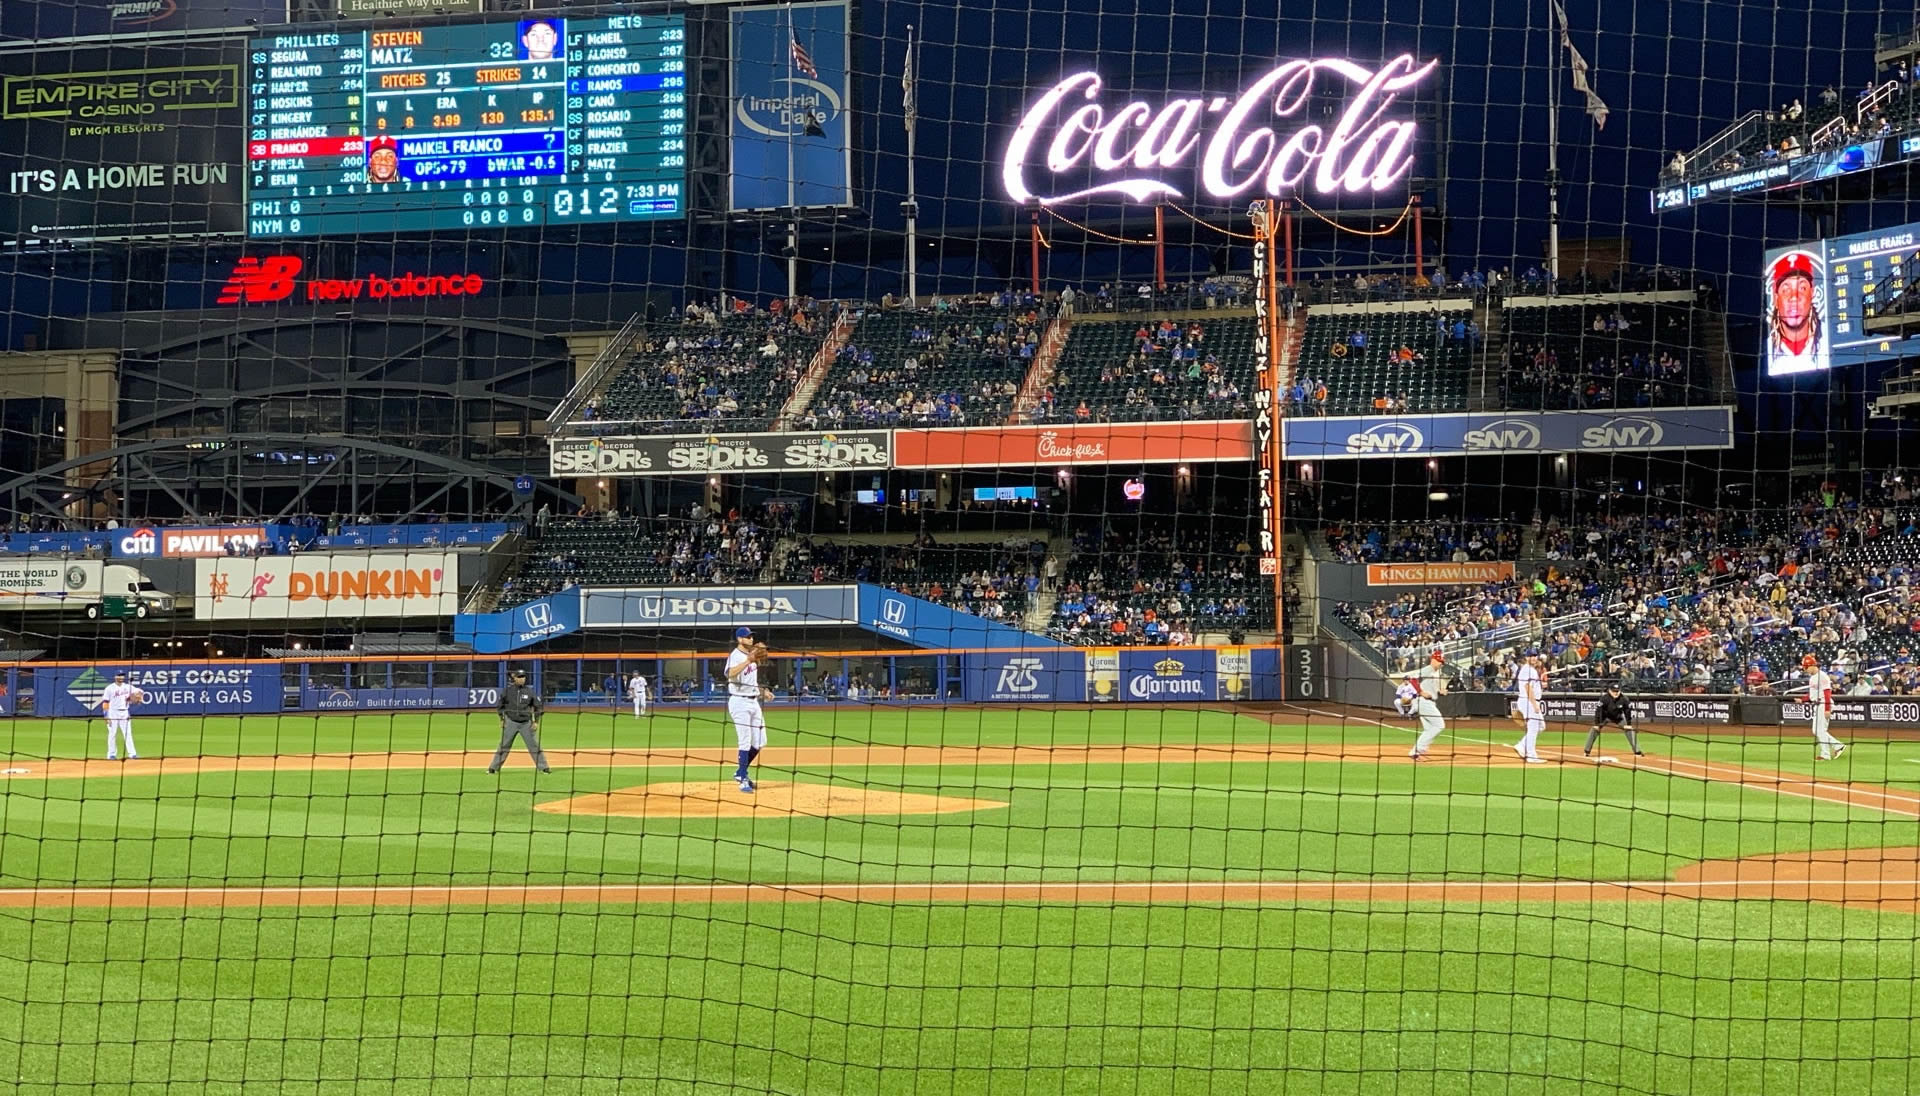 section 122, row 1 seat view  - citi field